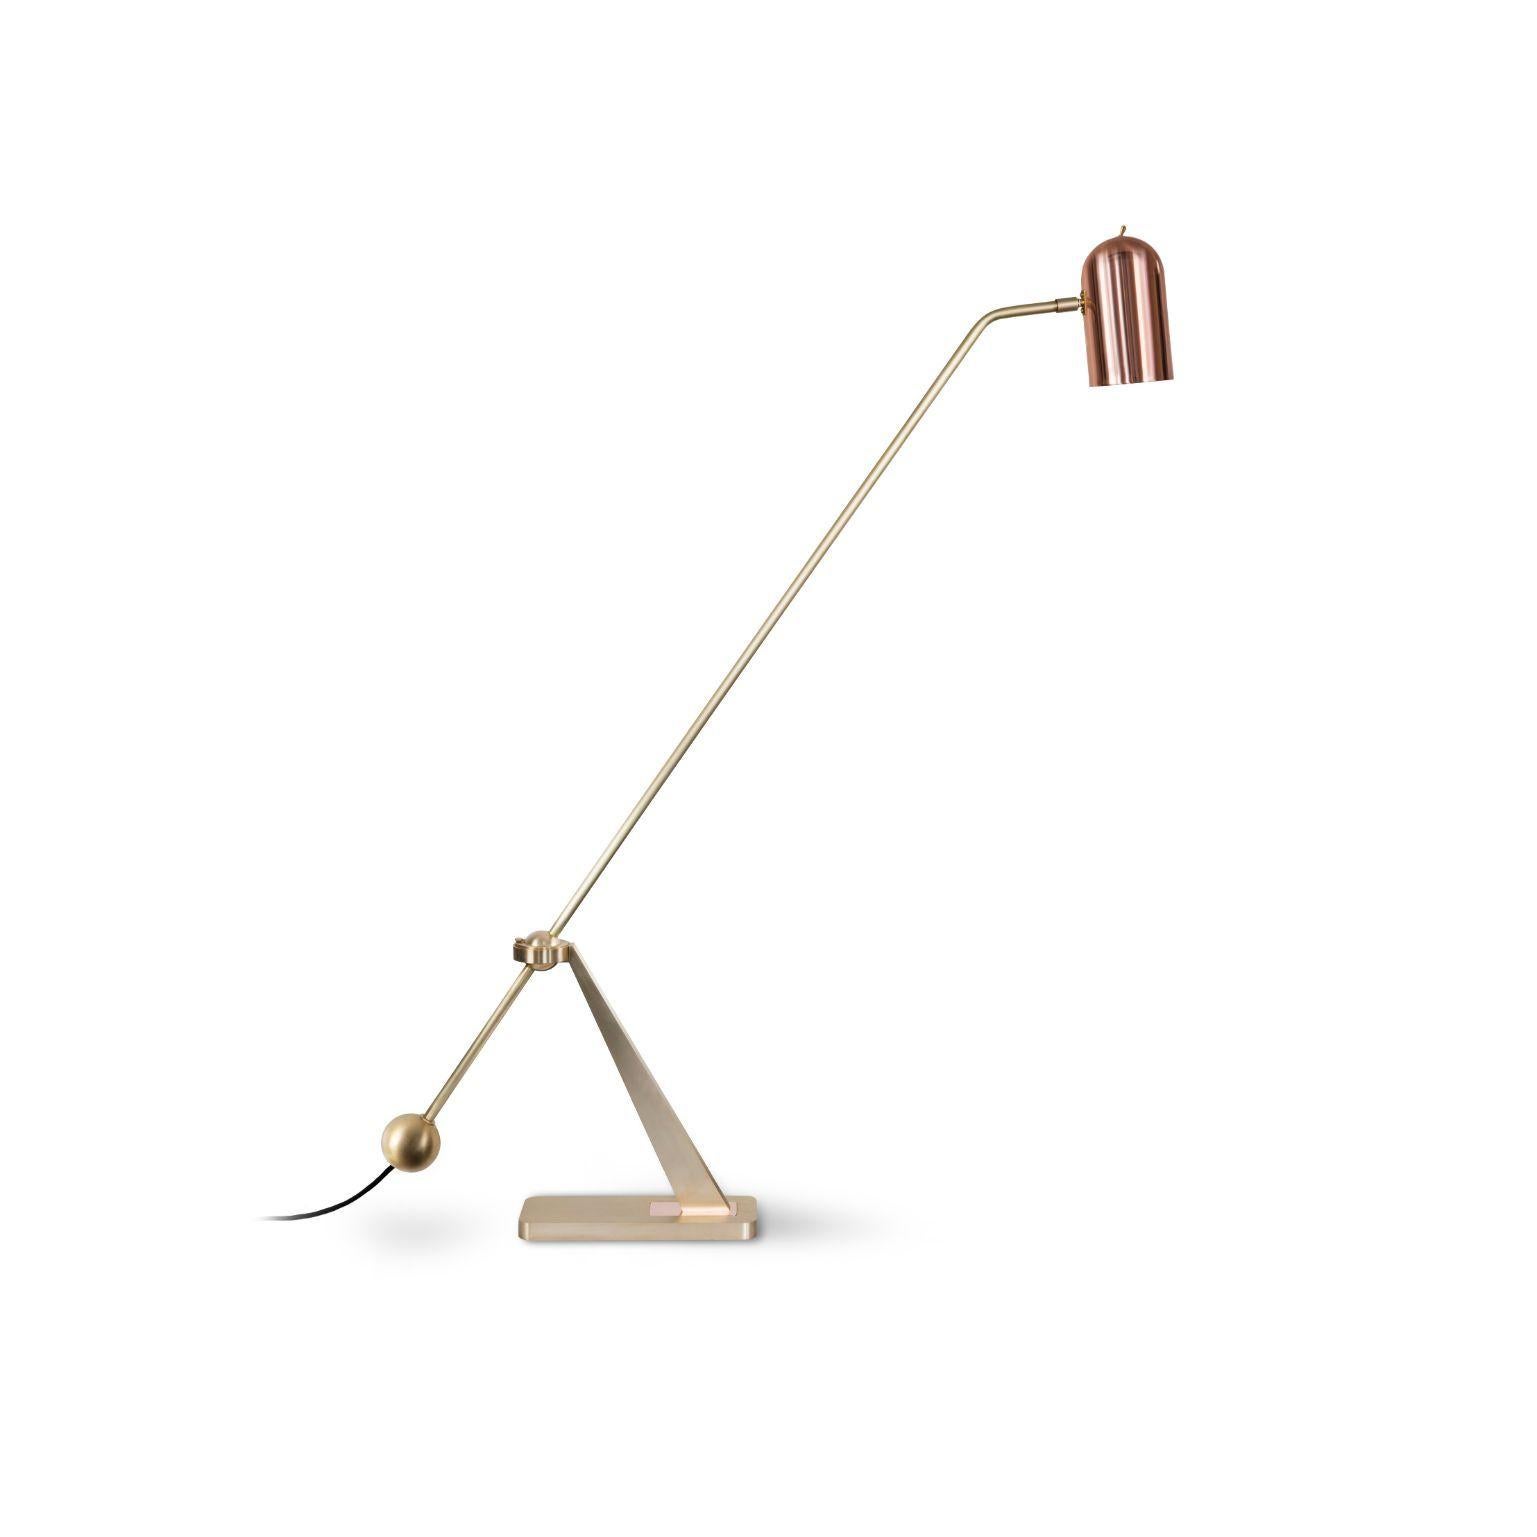 Stasis floor light - Brass + copper by Bert Frank
Dimensions: 125 x 128 x 15 cm
Materials: Brass, copper

When Adam Yeats and Robbie Llewellyn founded Bert Frank in 2013 it was a meeting of minds and the start of a collaborative creative